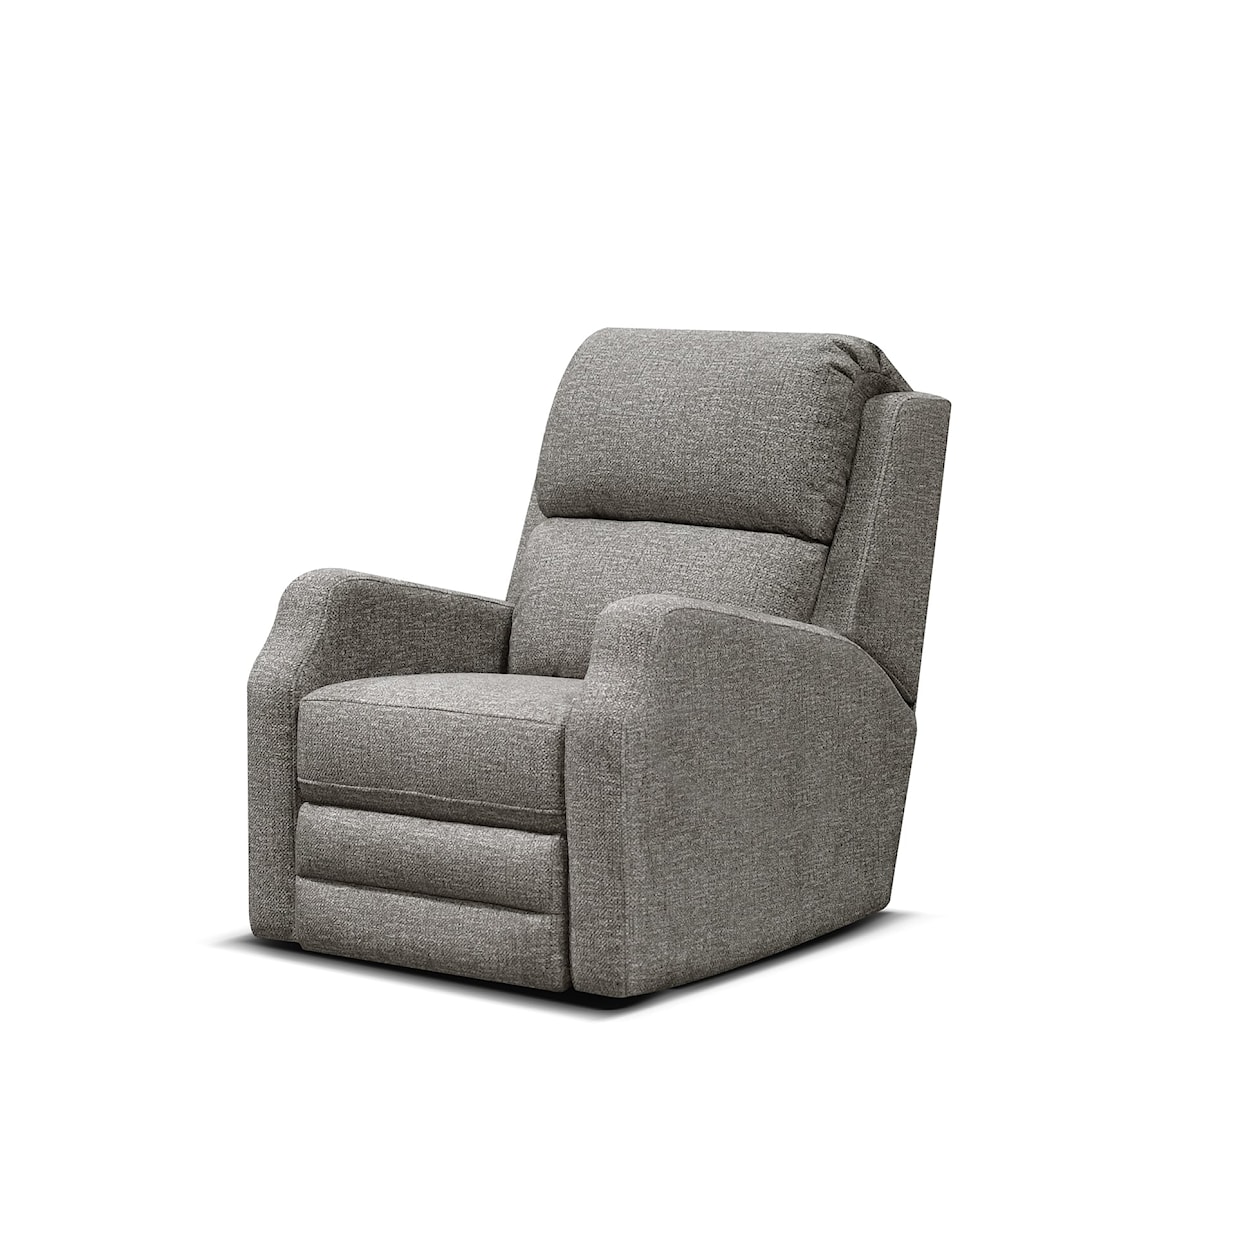 Tennessee Custom Upholstery EZ1A00/H Series Swivel Gliding Recliner